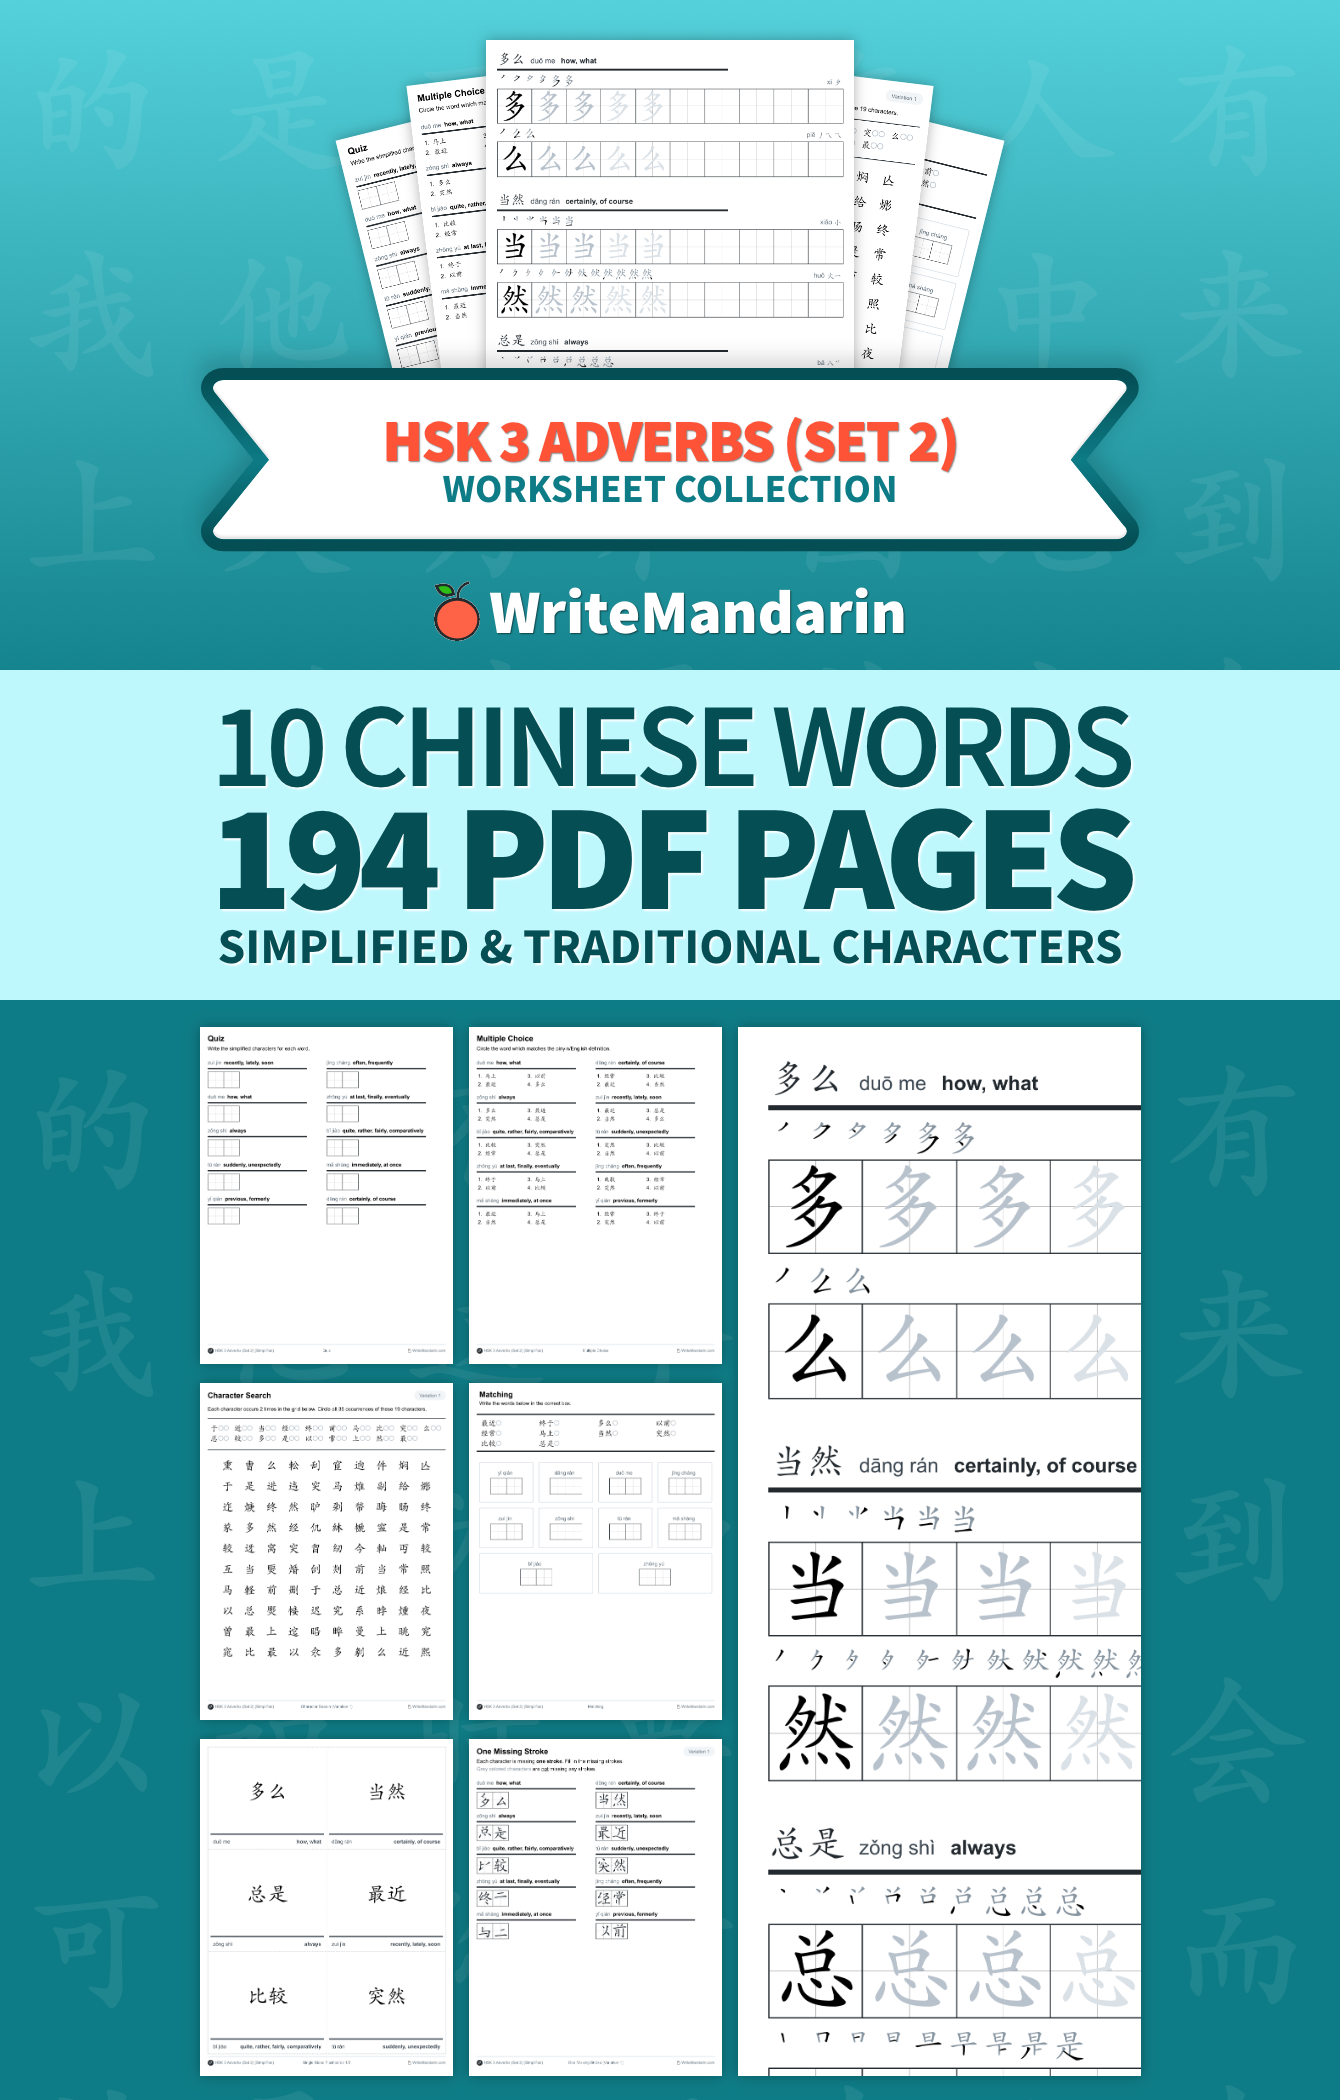 Preview image of HSK 3 Adverbs (Set 2) worksheet collection